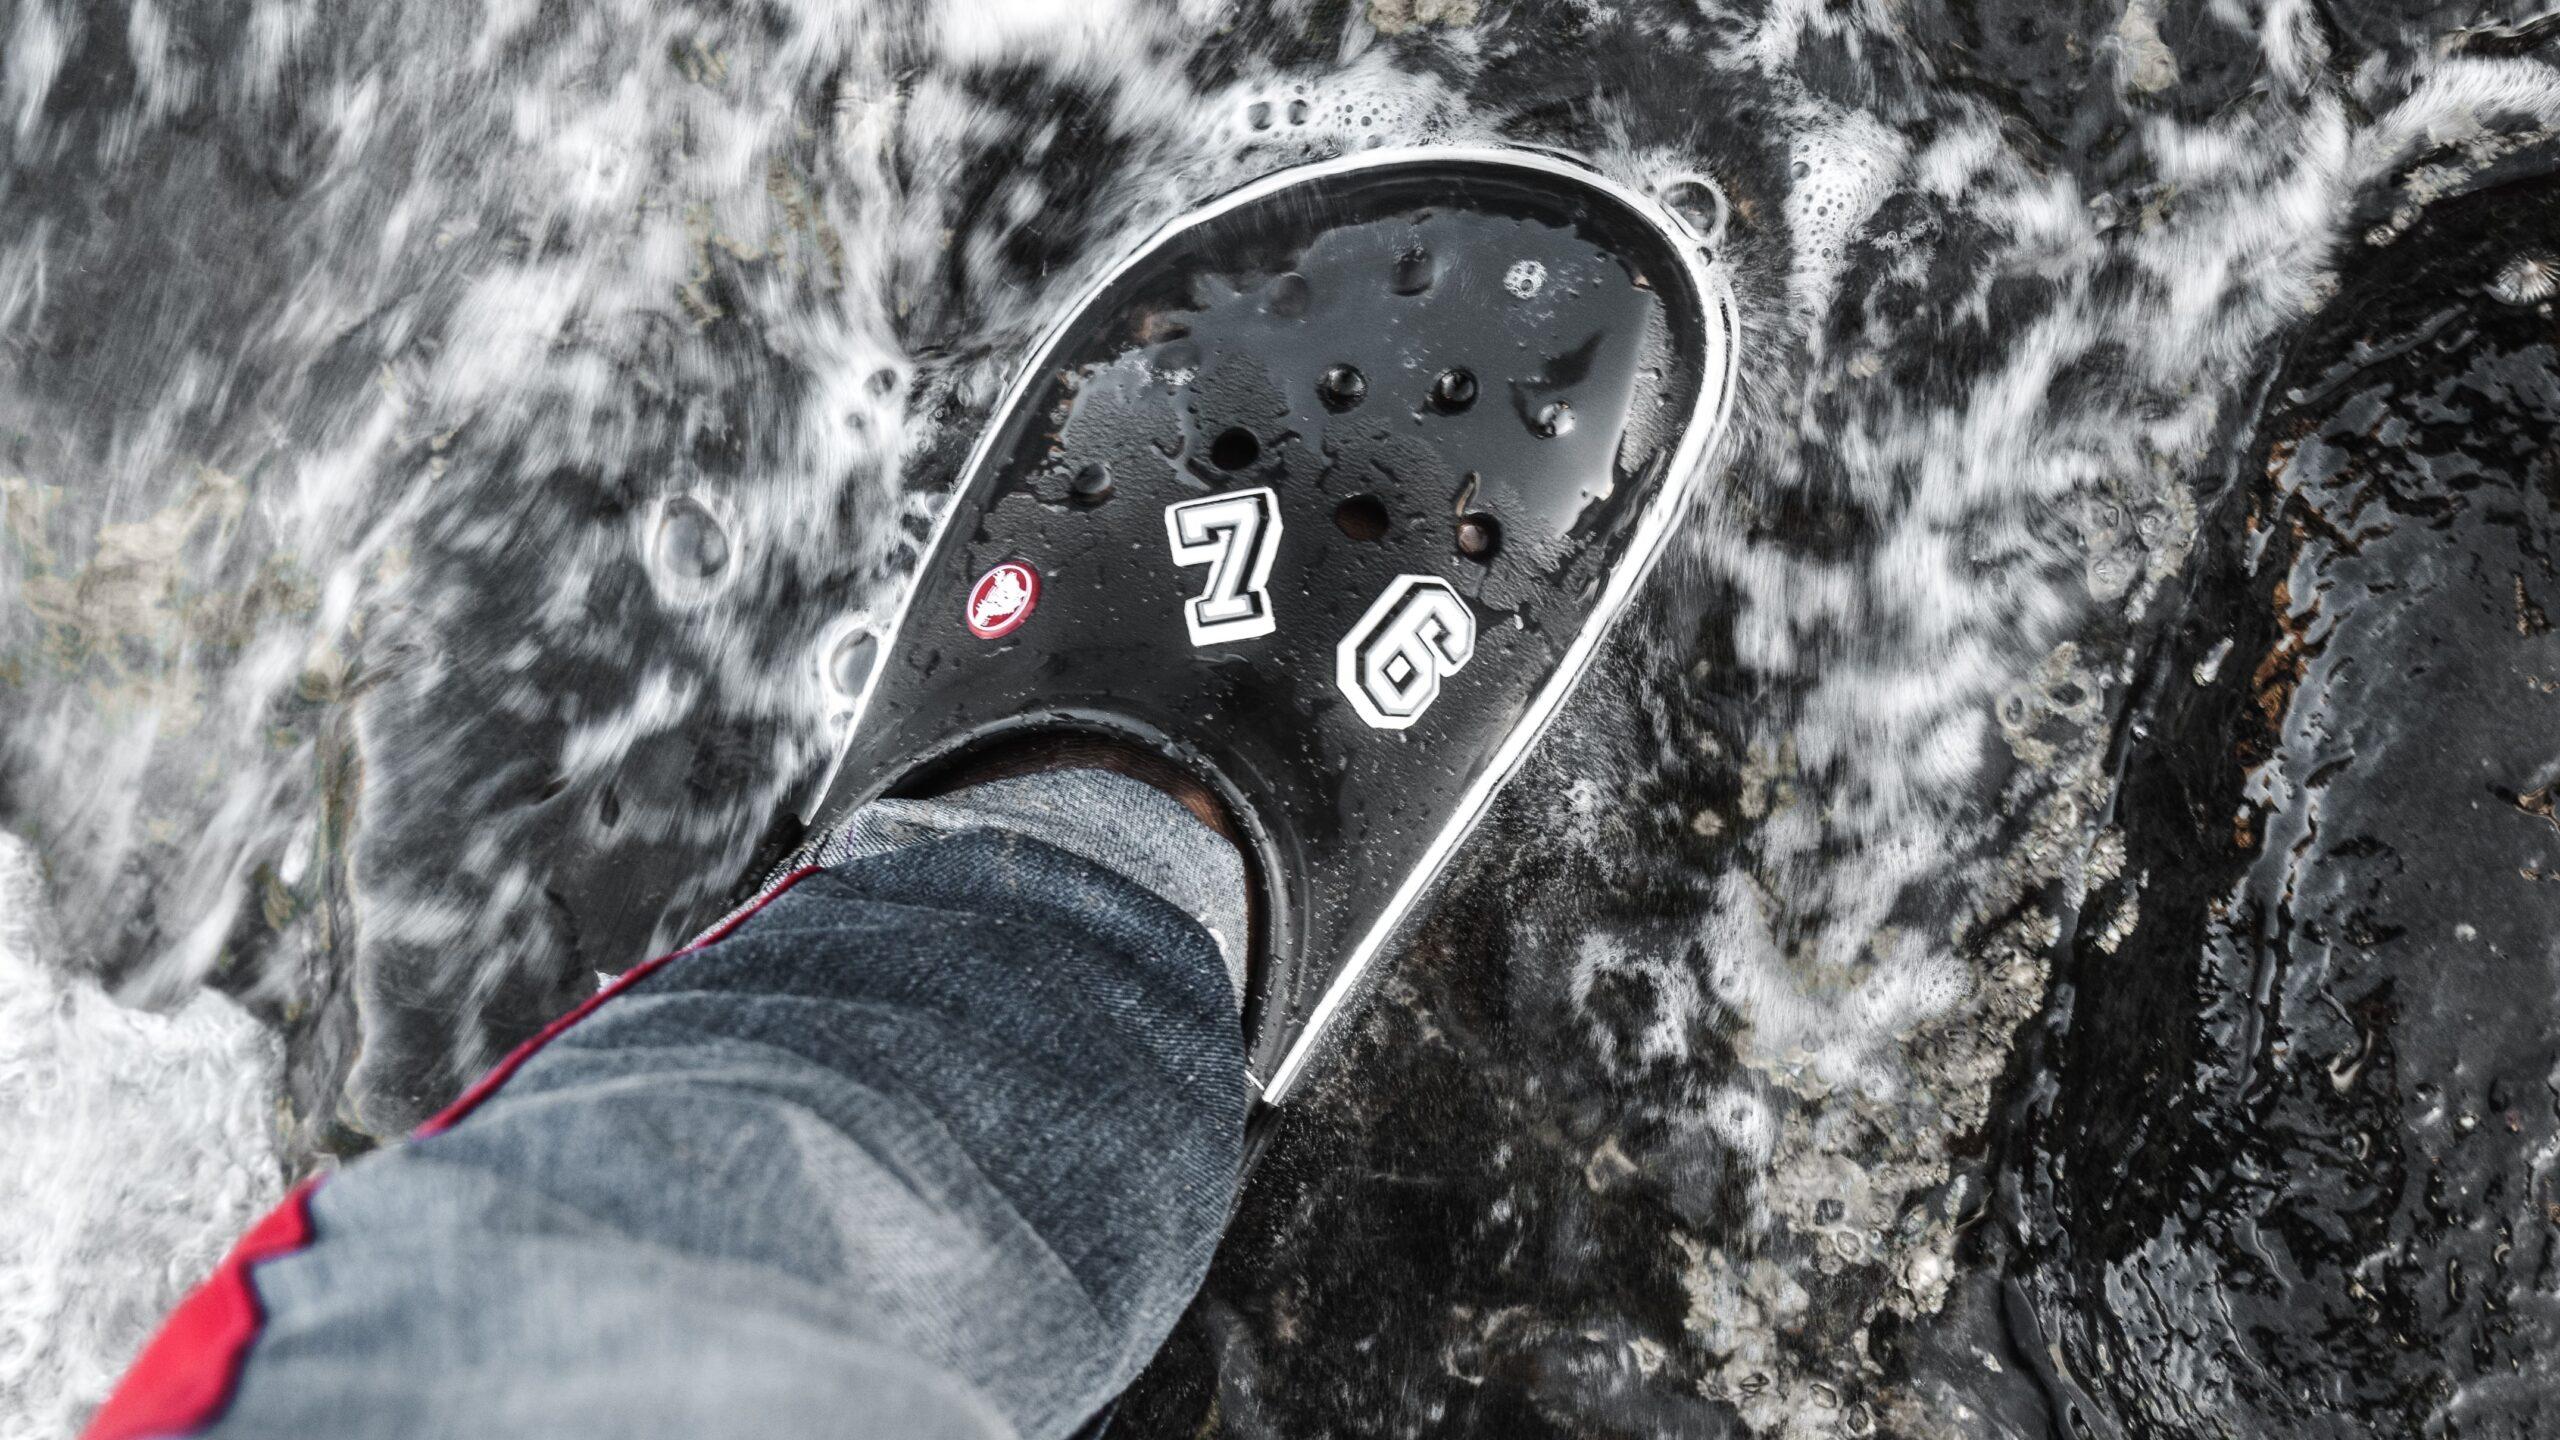 Close up of a black Crocs-branded shoe dangling over a rock face.